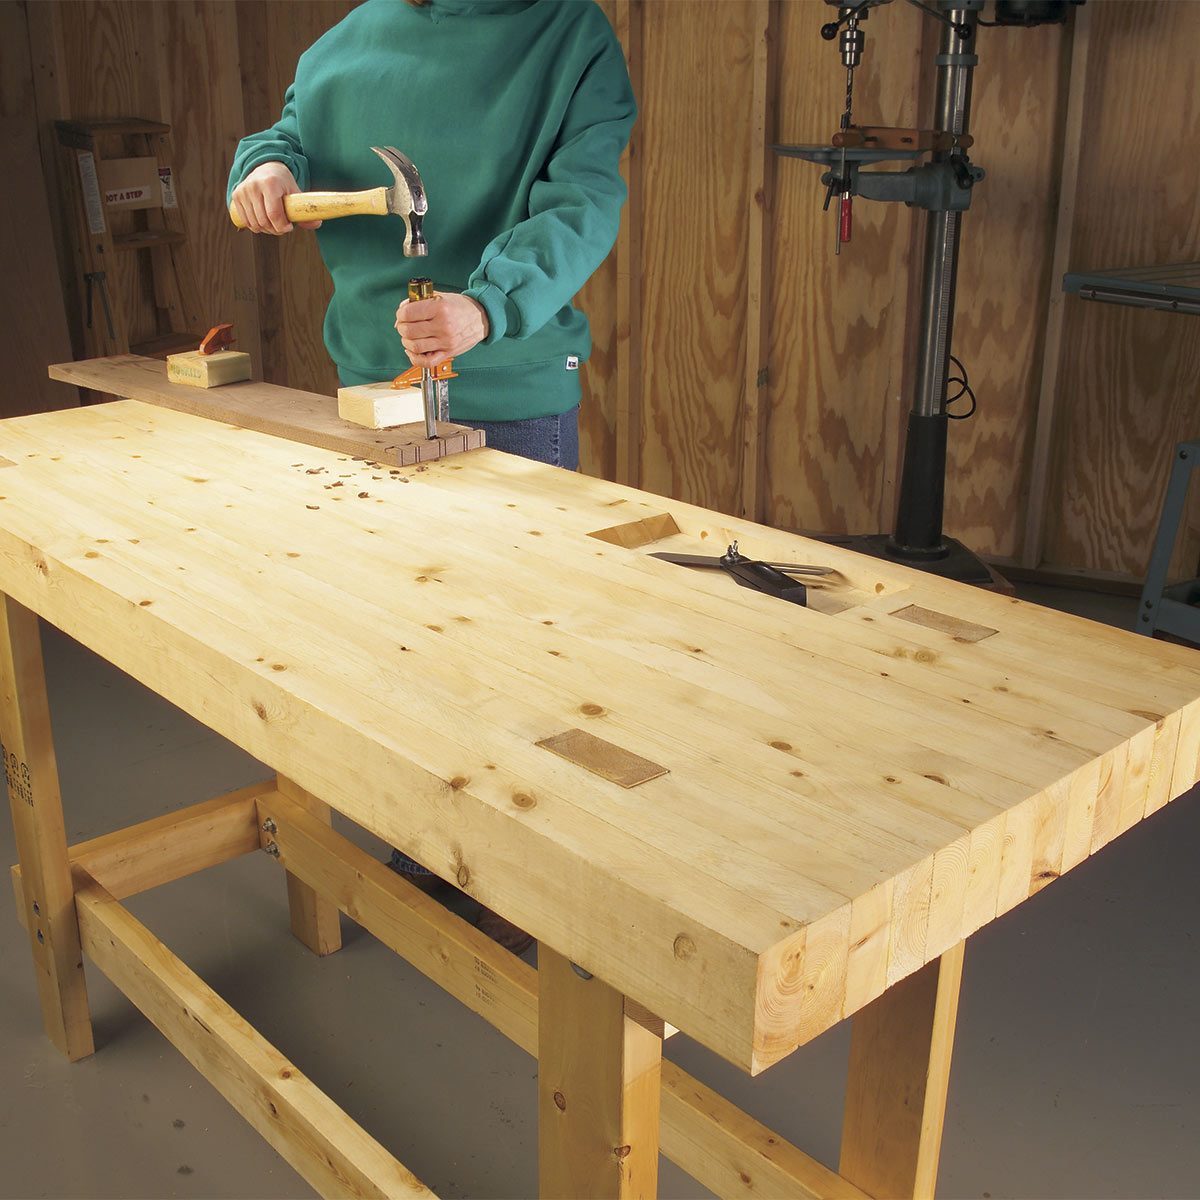 12 Super-Simple Workbenches You Can Build â€